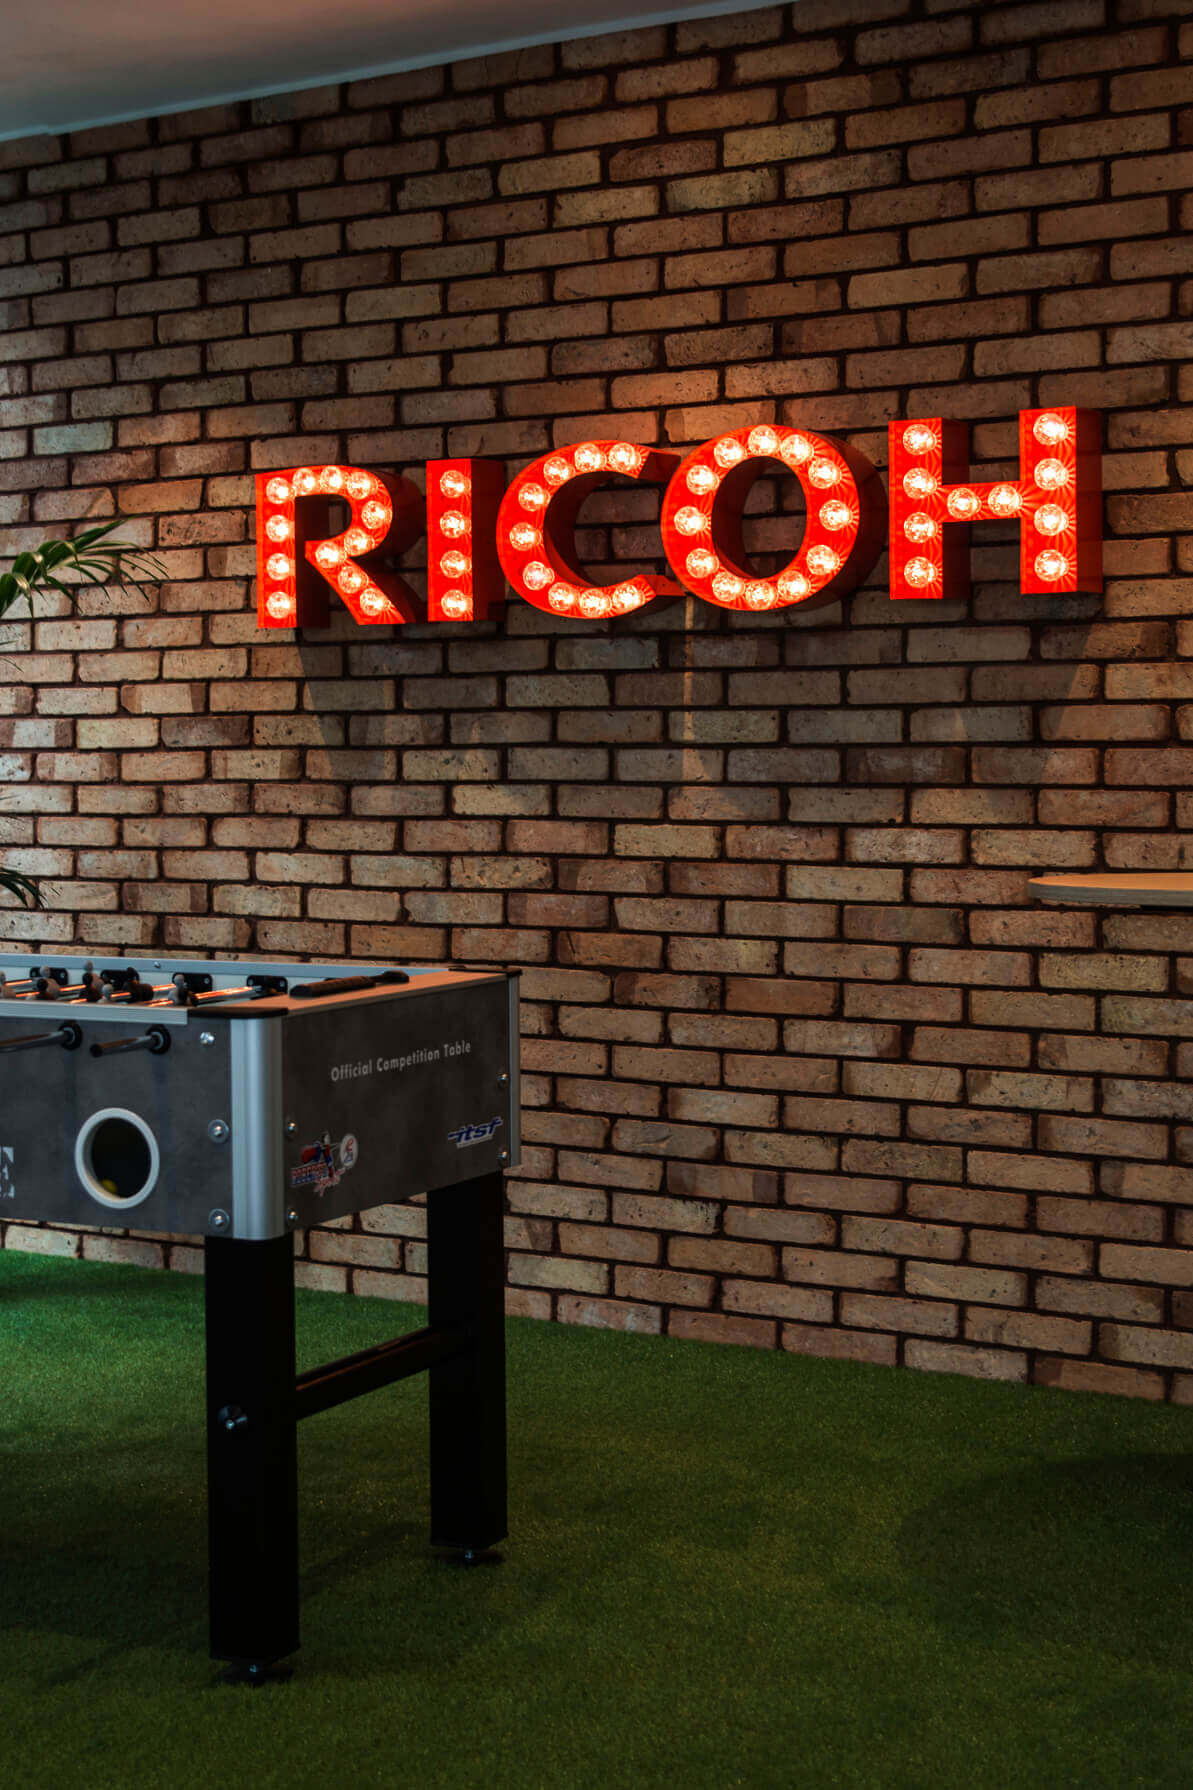 RICOH - RICOH - Letters with light bulbs on brick wall